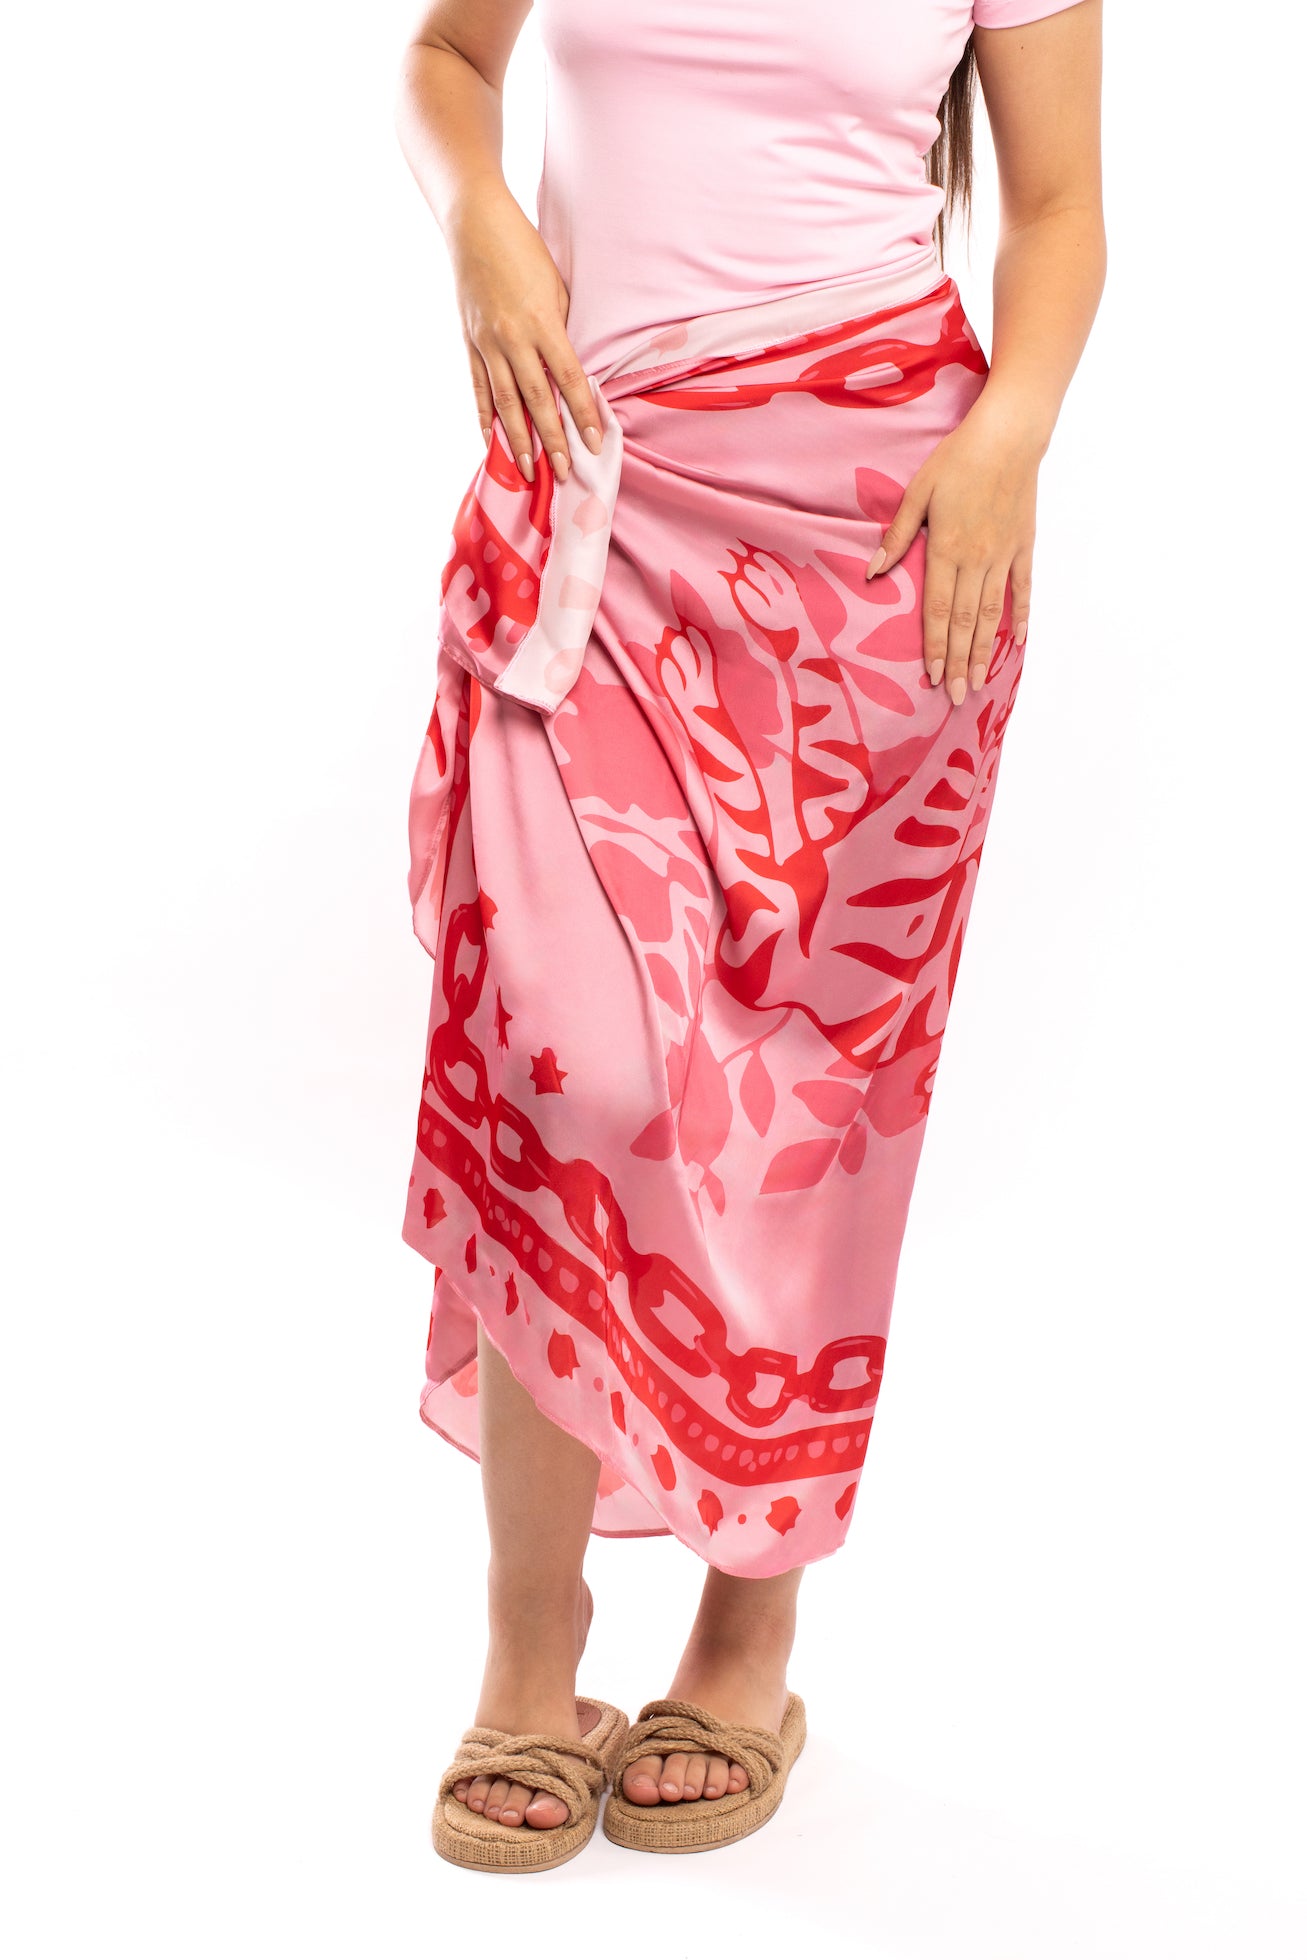 The Pink Tiger Satin Cover up